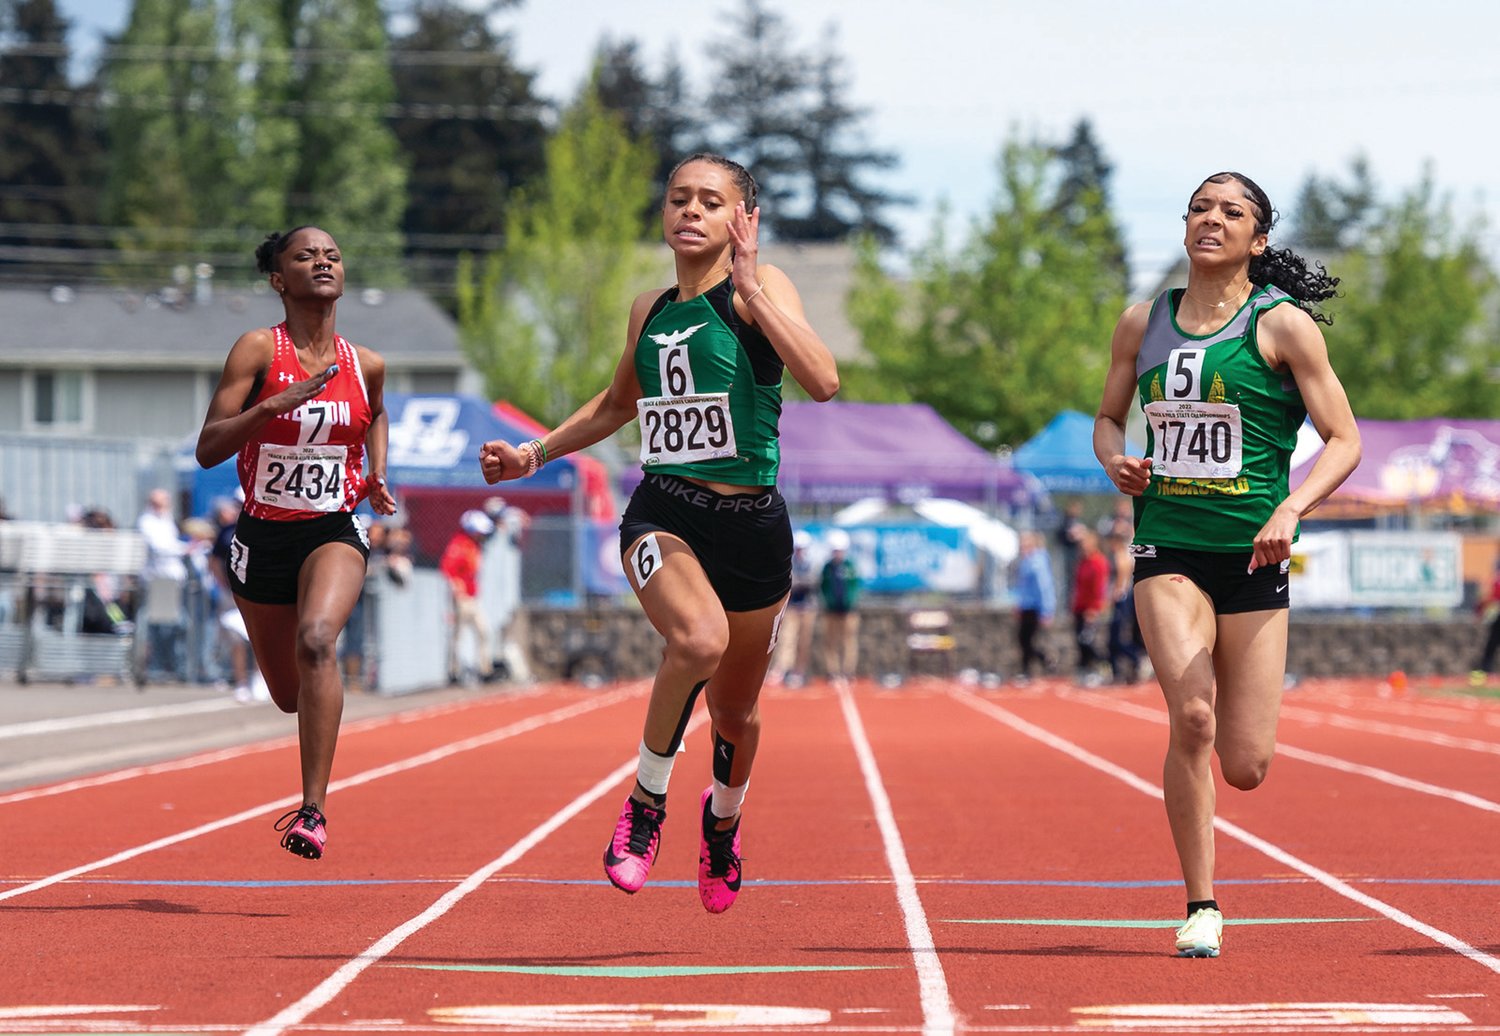 Tumwater's Ava Jones strides toward the finish line in the 2A Girls 100 prelims at the 4A/3A/2A State Track and Field Championships on Friday, May 27, 2022, at Mount Tahoma High School in Tacoma. (Joshua Hart/For The Chronicle)